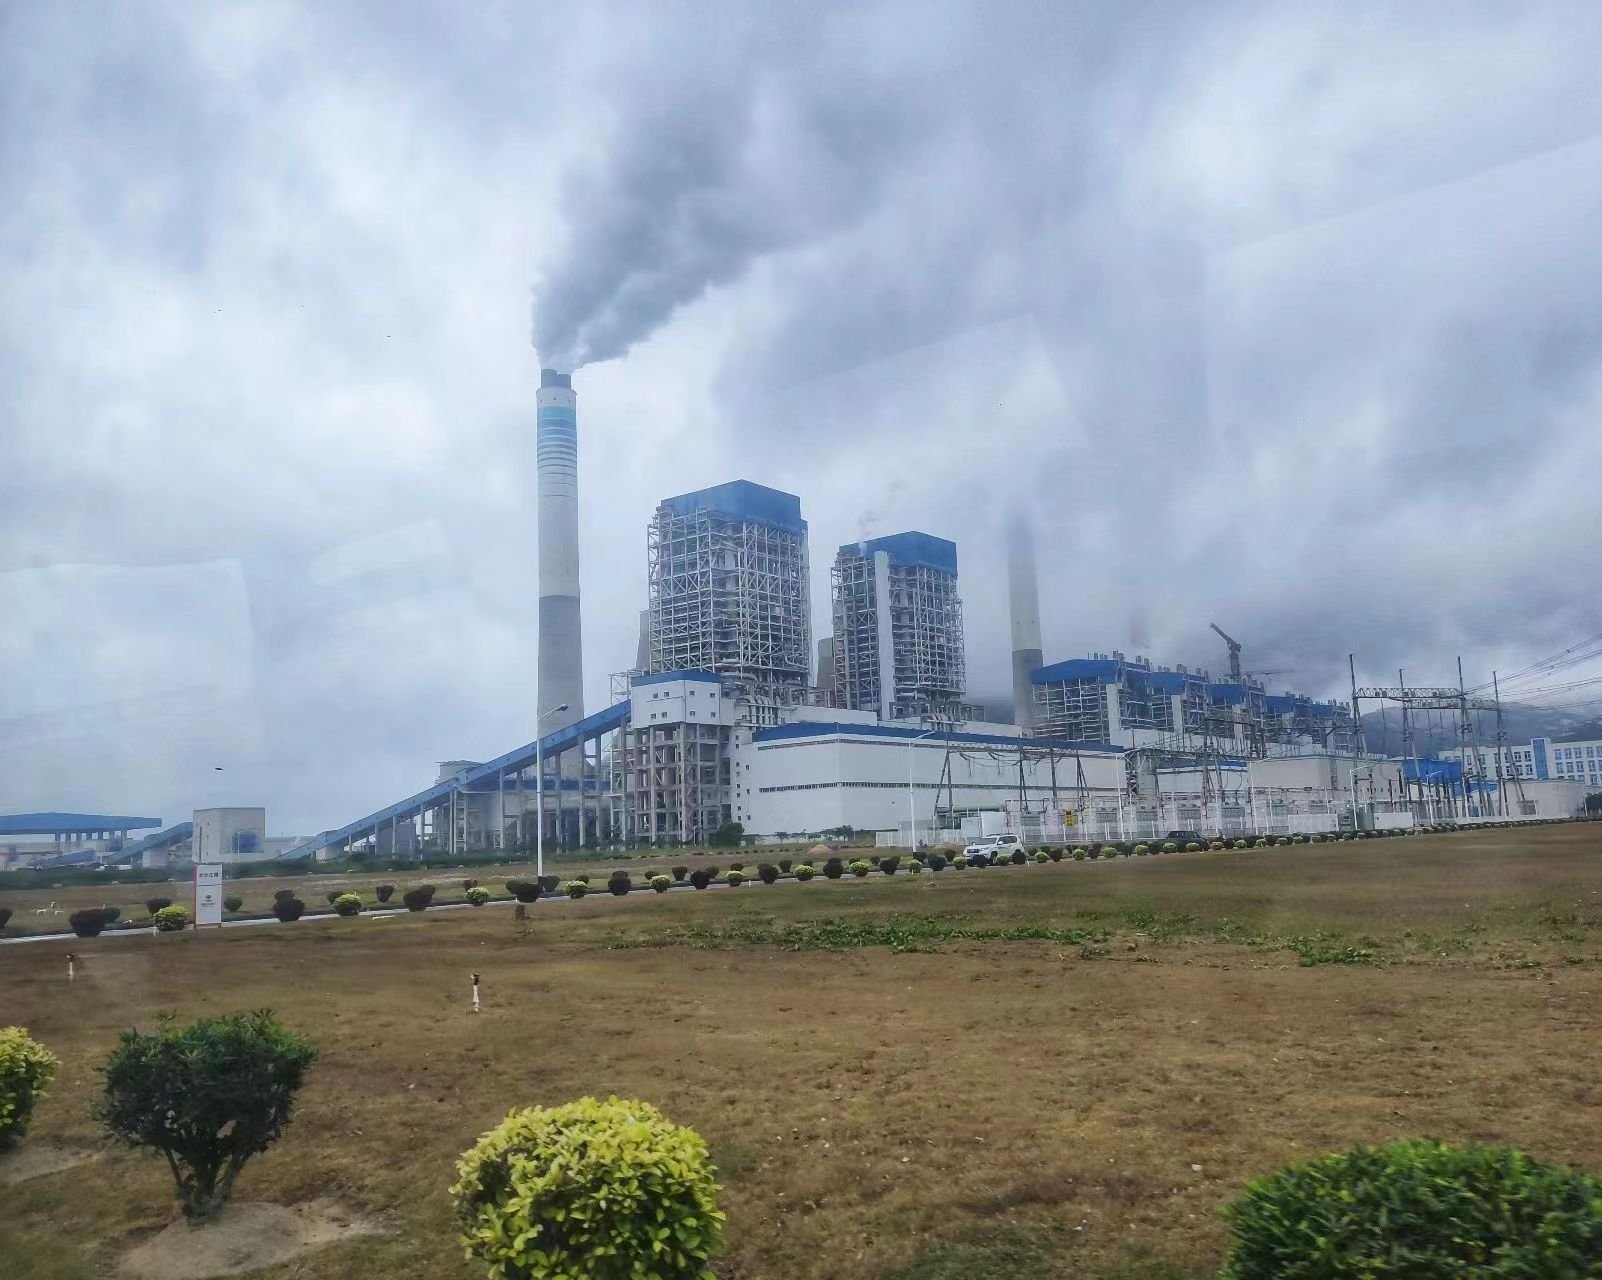 What does a modern Chinese coal plant look like? I'd never been to one before and was curious. So I had to take a trip...  Say hello to the Taish